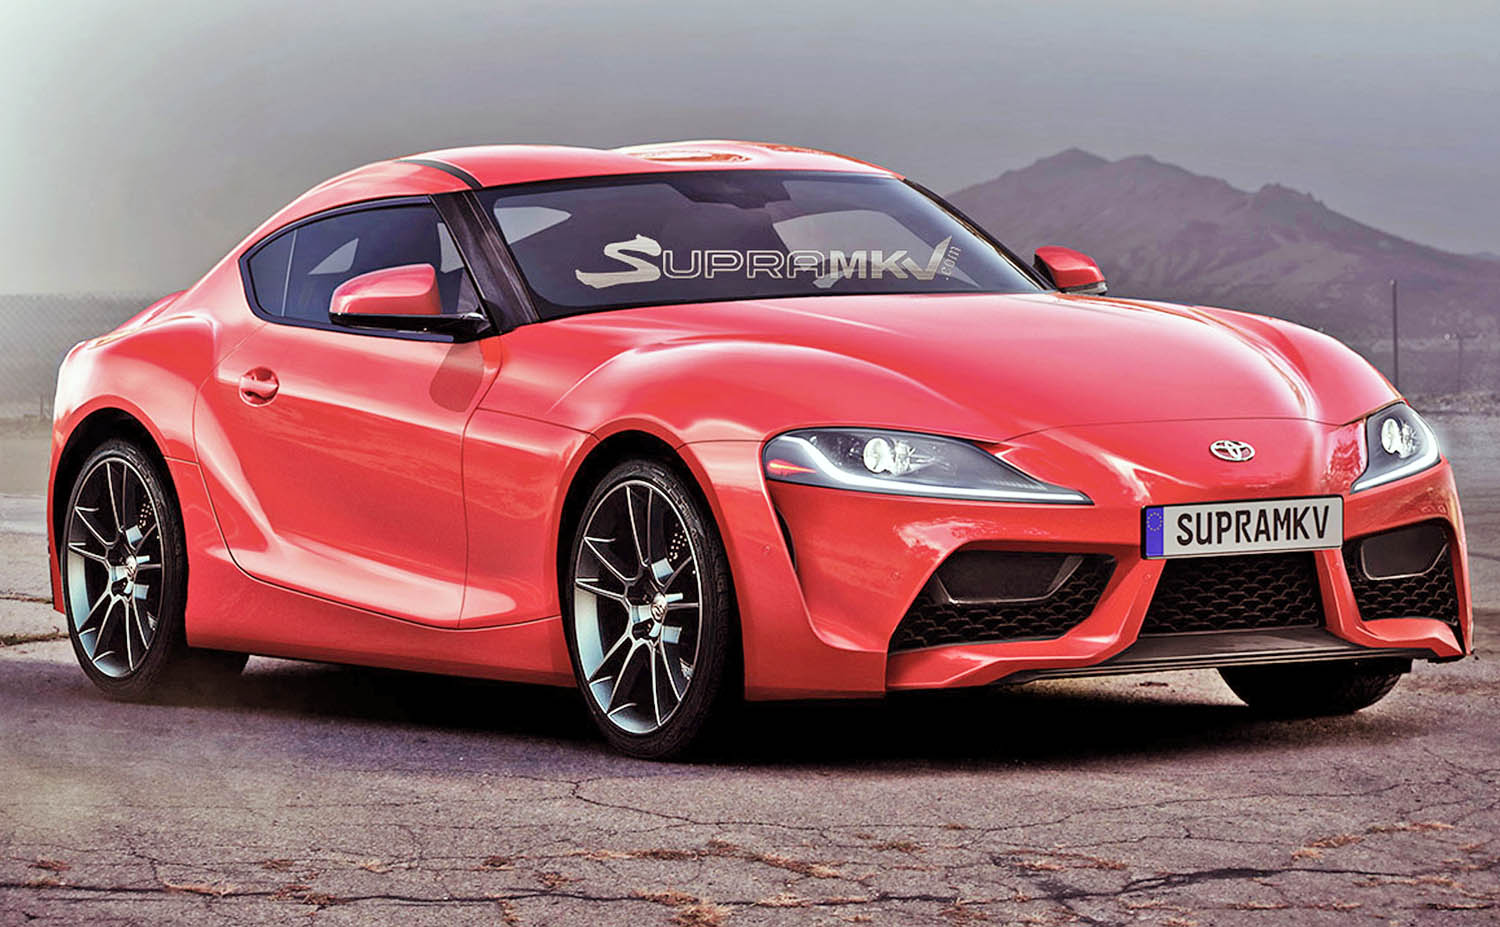 Toyota Supra appears in photos before its official launch